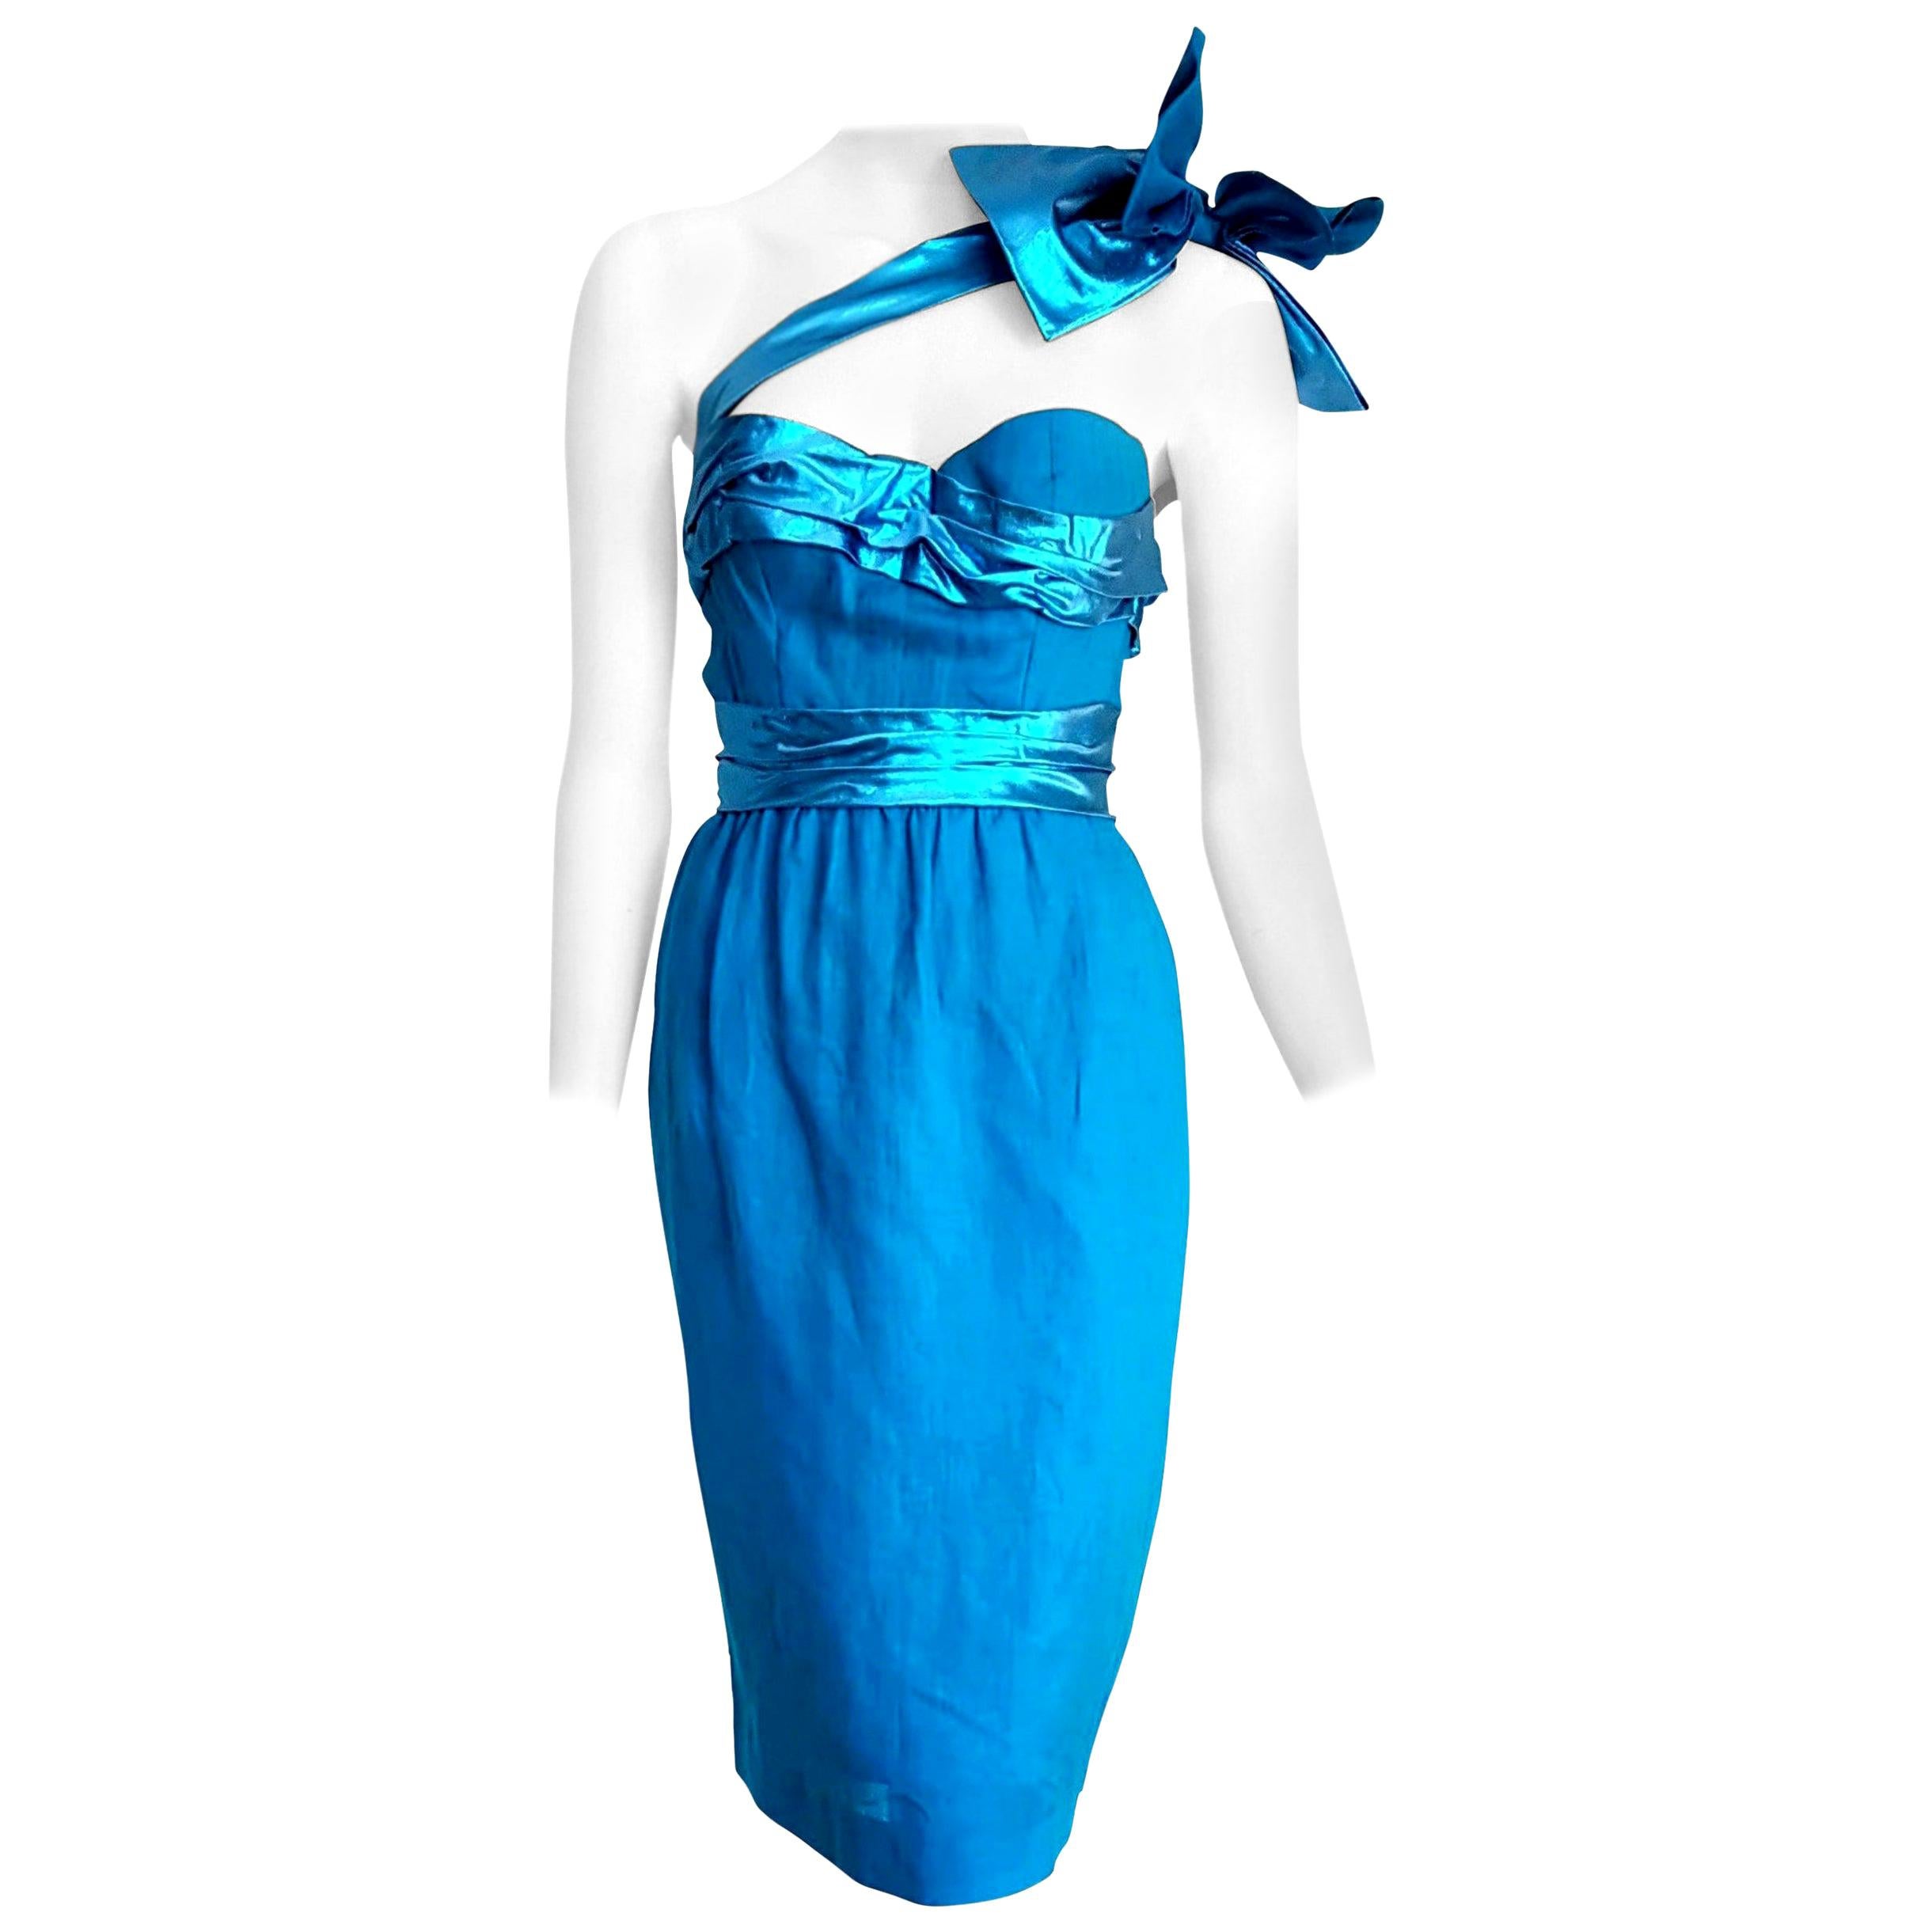 VALENTINO "New" Haute Couture One Shoulder Strap Turquoise Silk Dress - Unworn For Sale